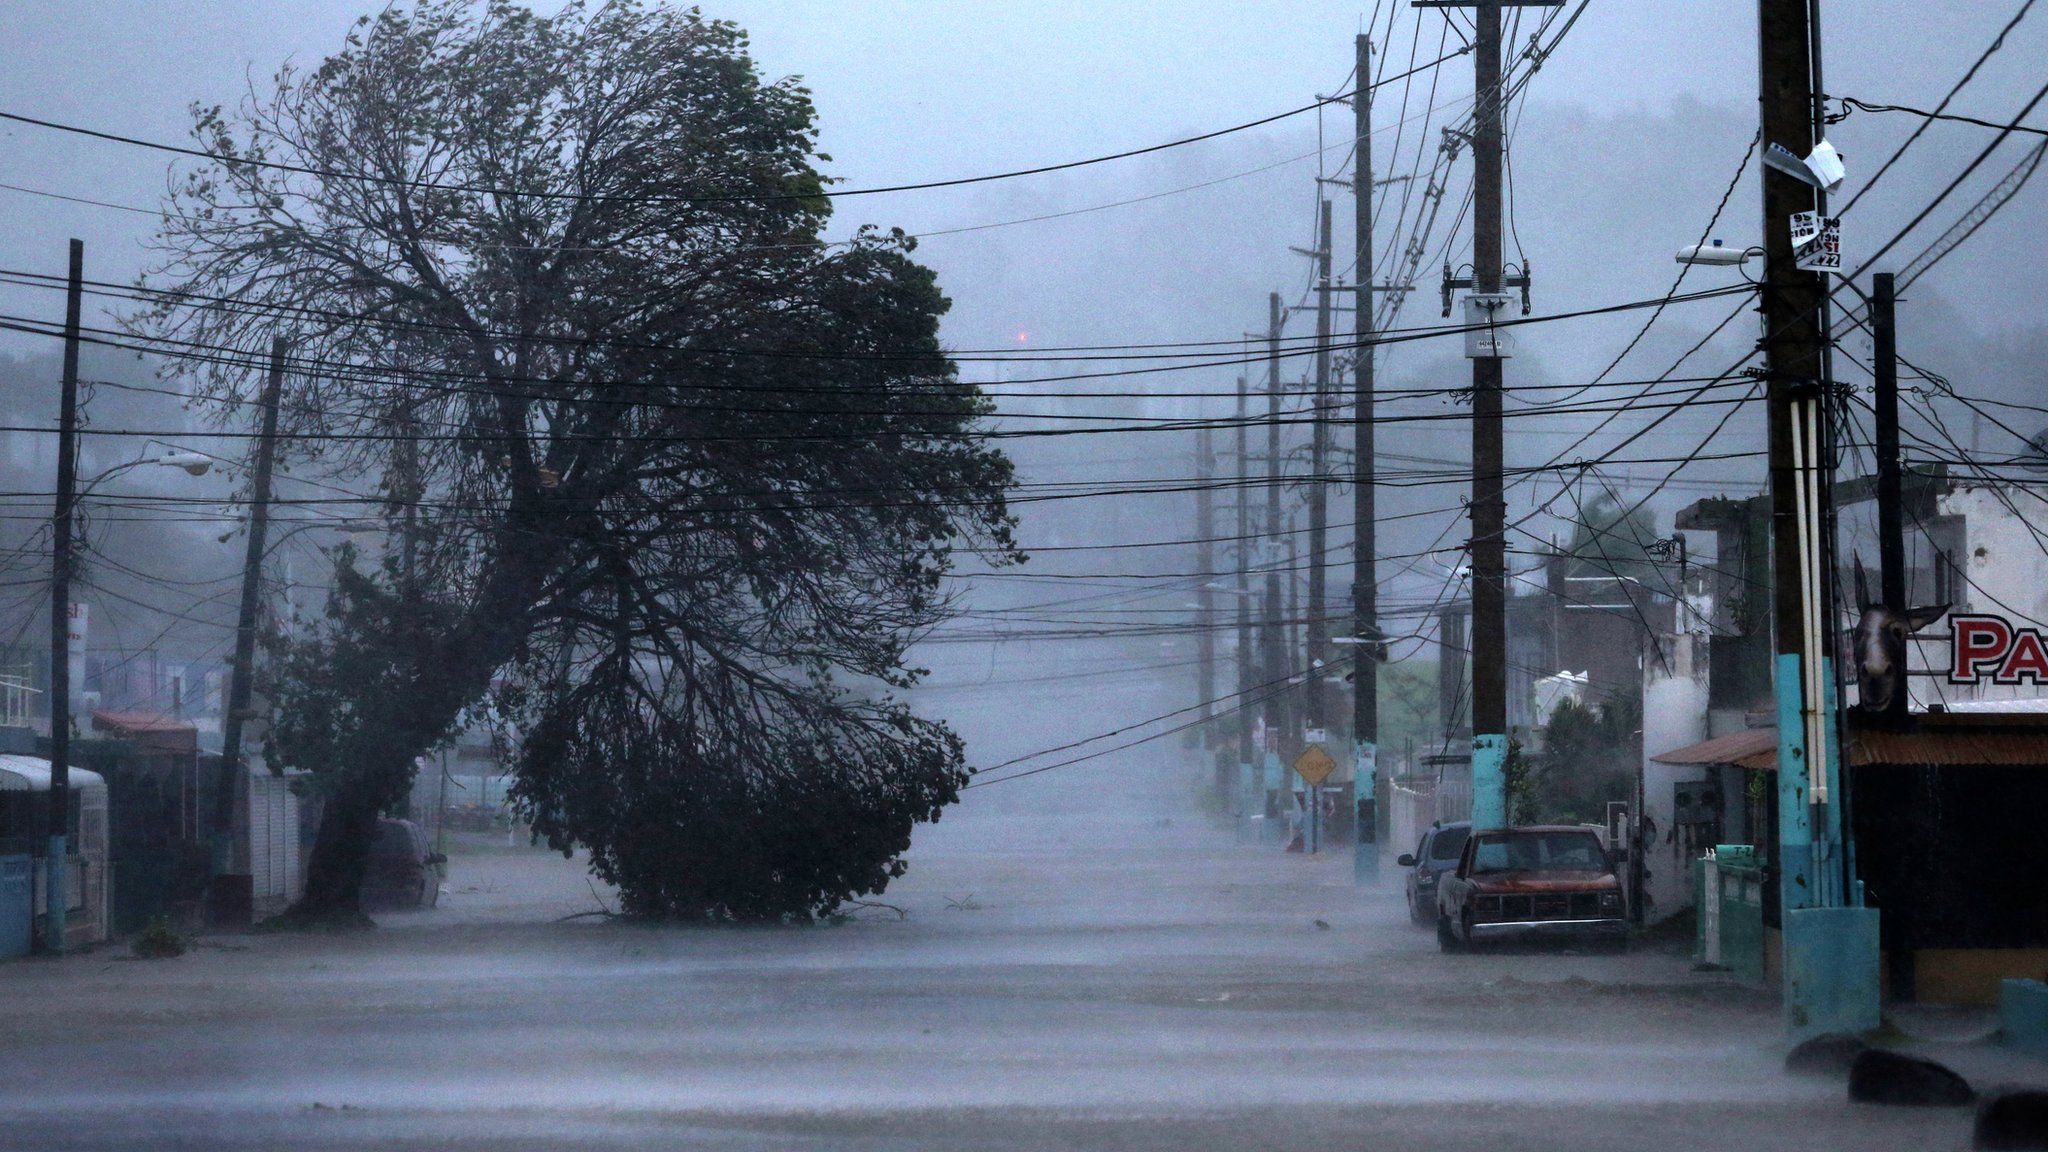 A street is flooded during the passing of Hurricane Irma on September 6, 2017 in Fajardo, Puerto Rico.